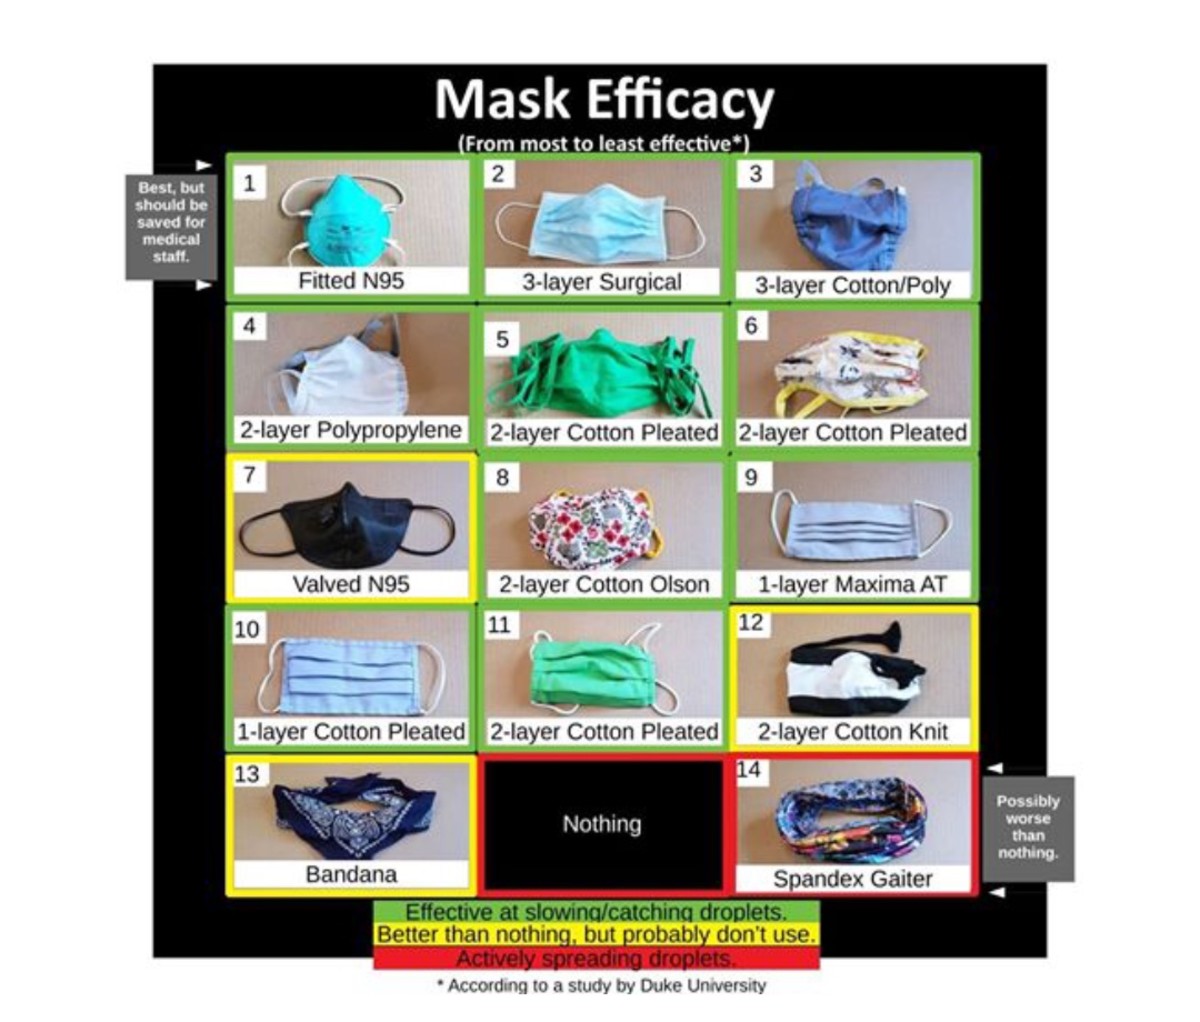 Study on efficacy of 14 different face masks against COVID-19